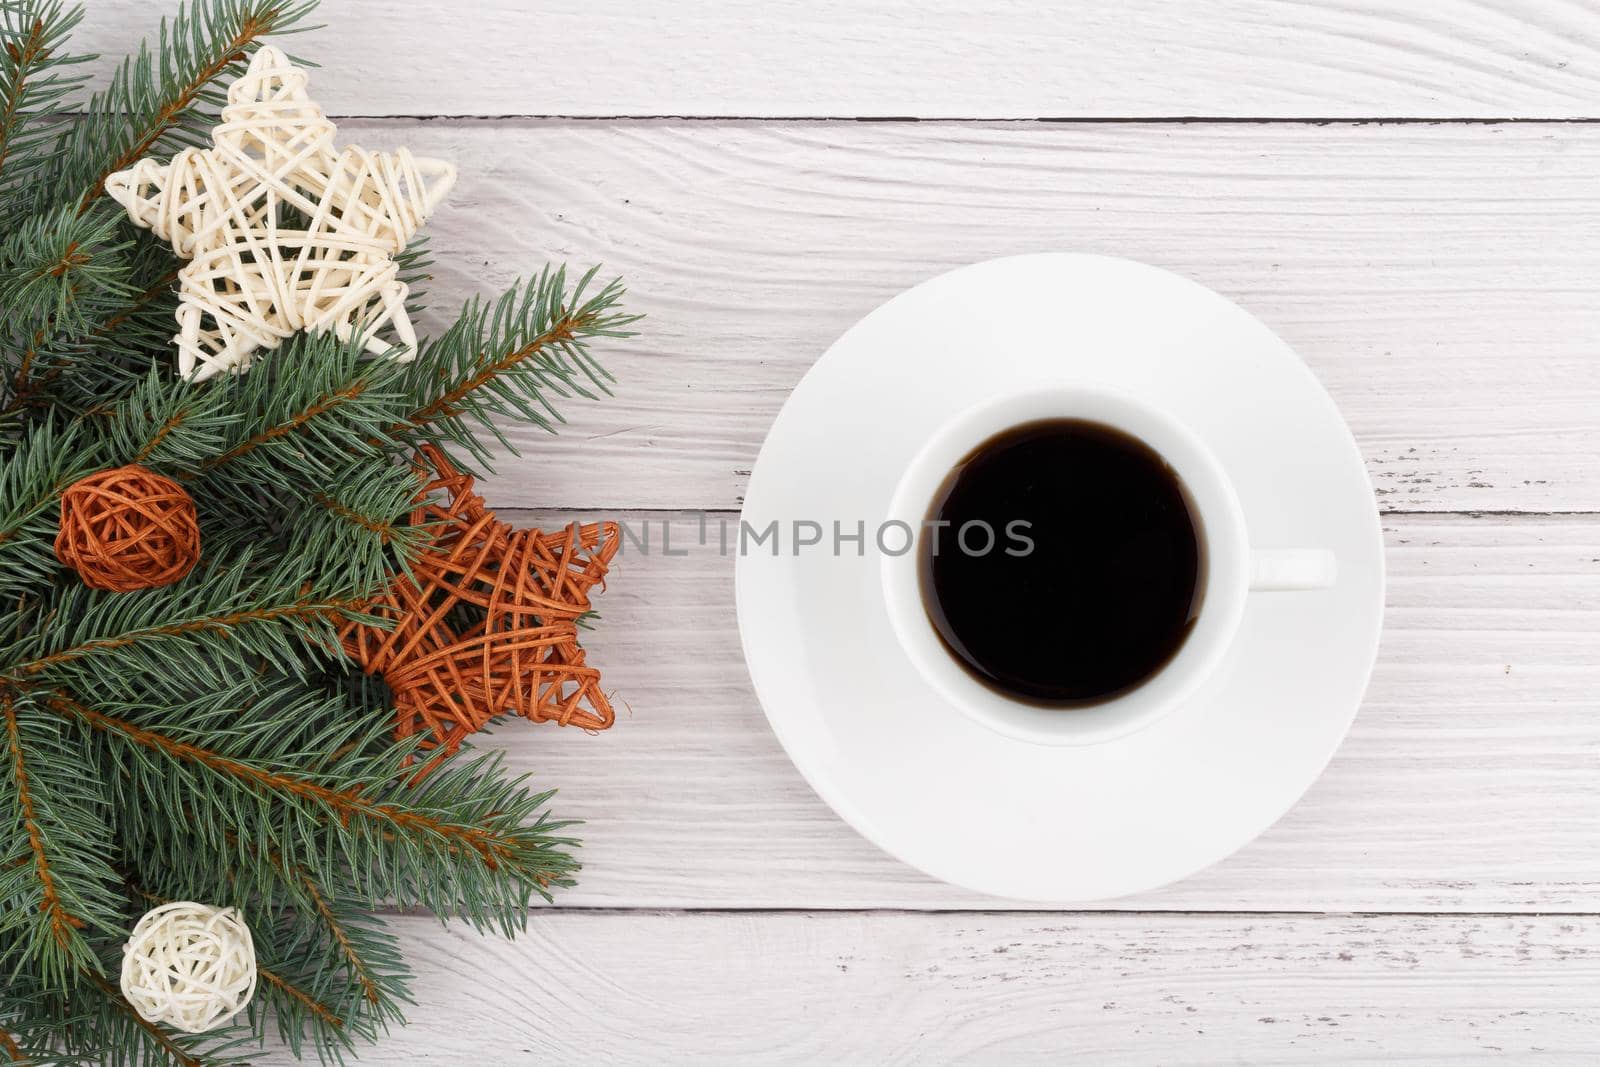 Flat lay with white ceramic coffee cup with a saucer on white wooden table decorated with Christmas tree and rotang stars with balls